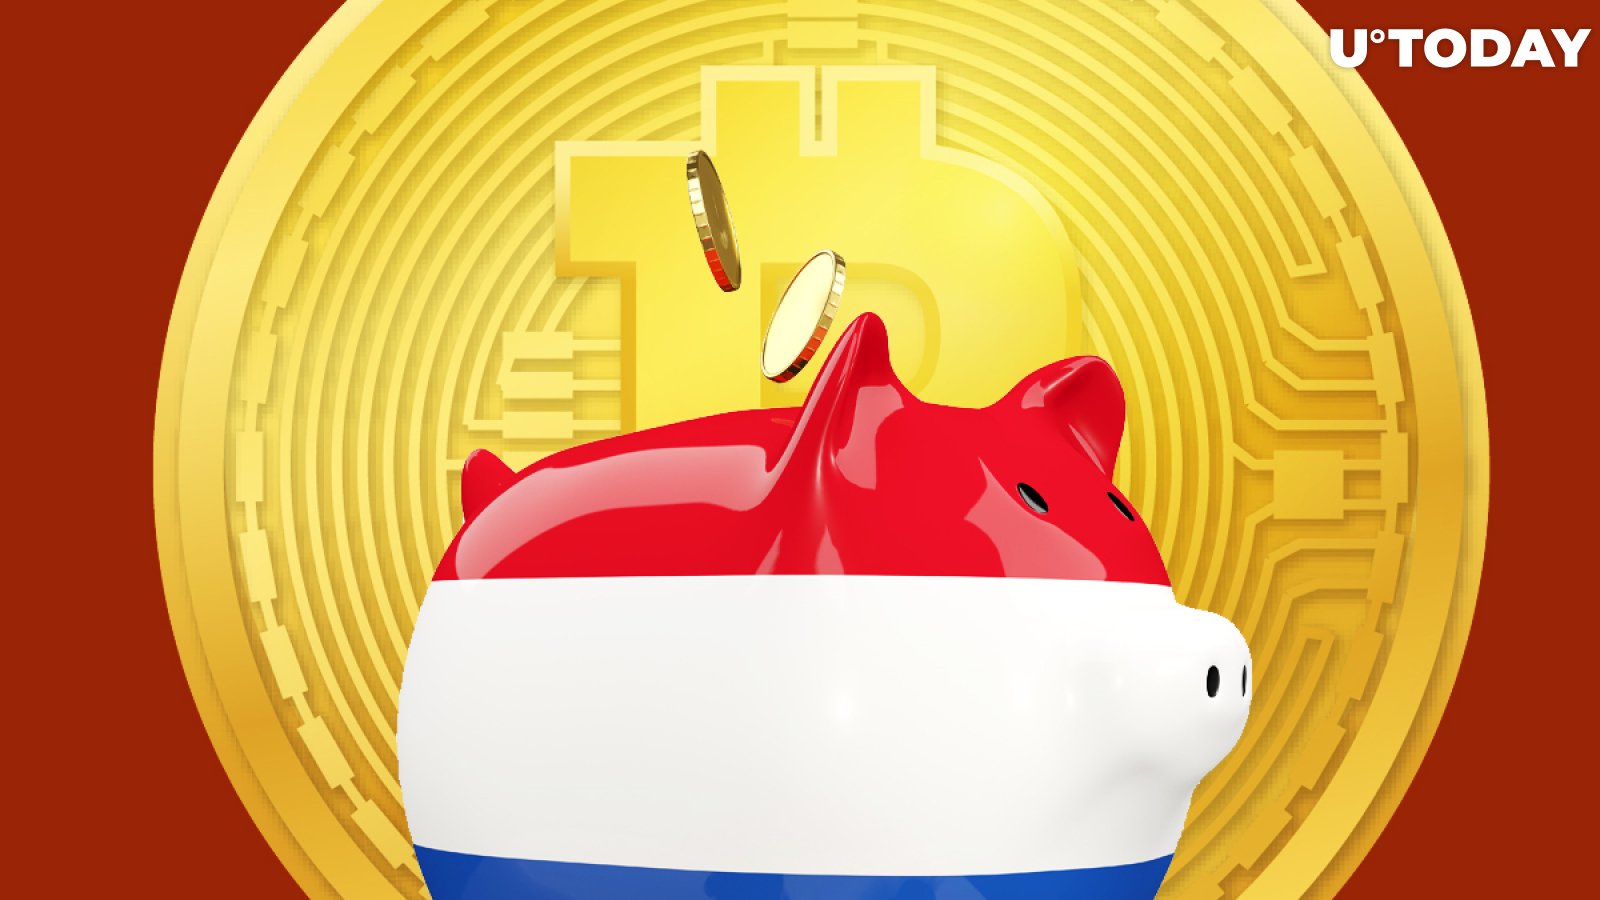 Crypto Firms to Be Regulated by Central Bank of Netherlands Starting from Jan 10 2020, Reuters Reports